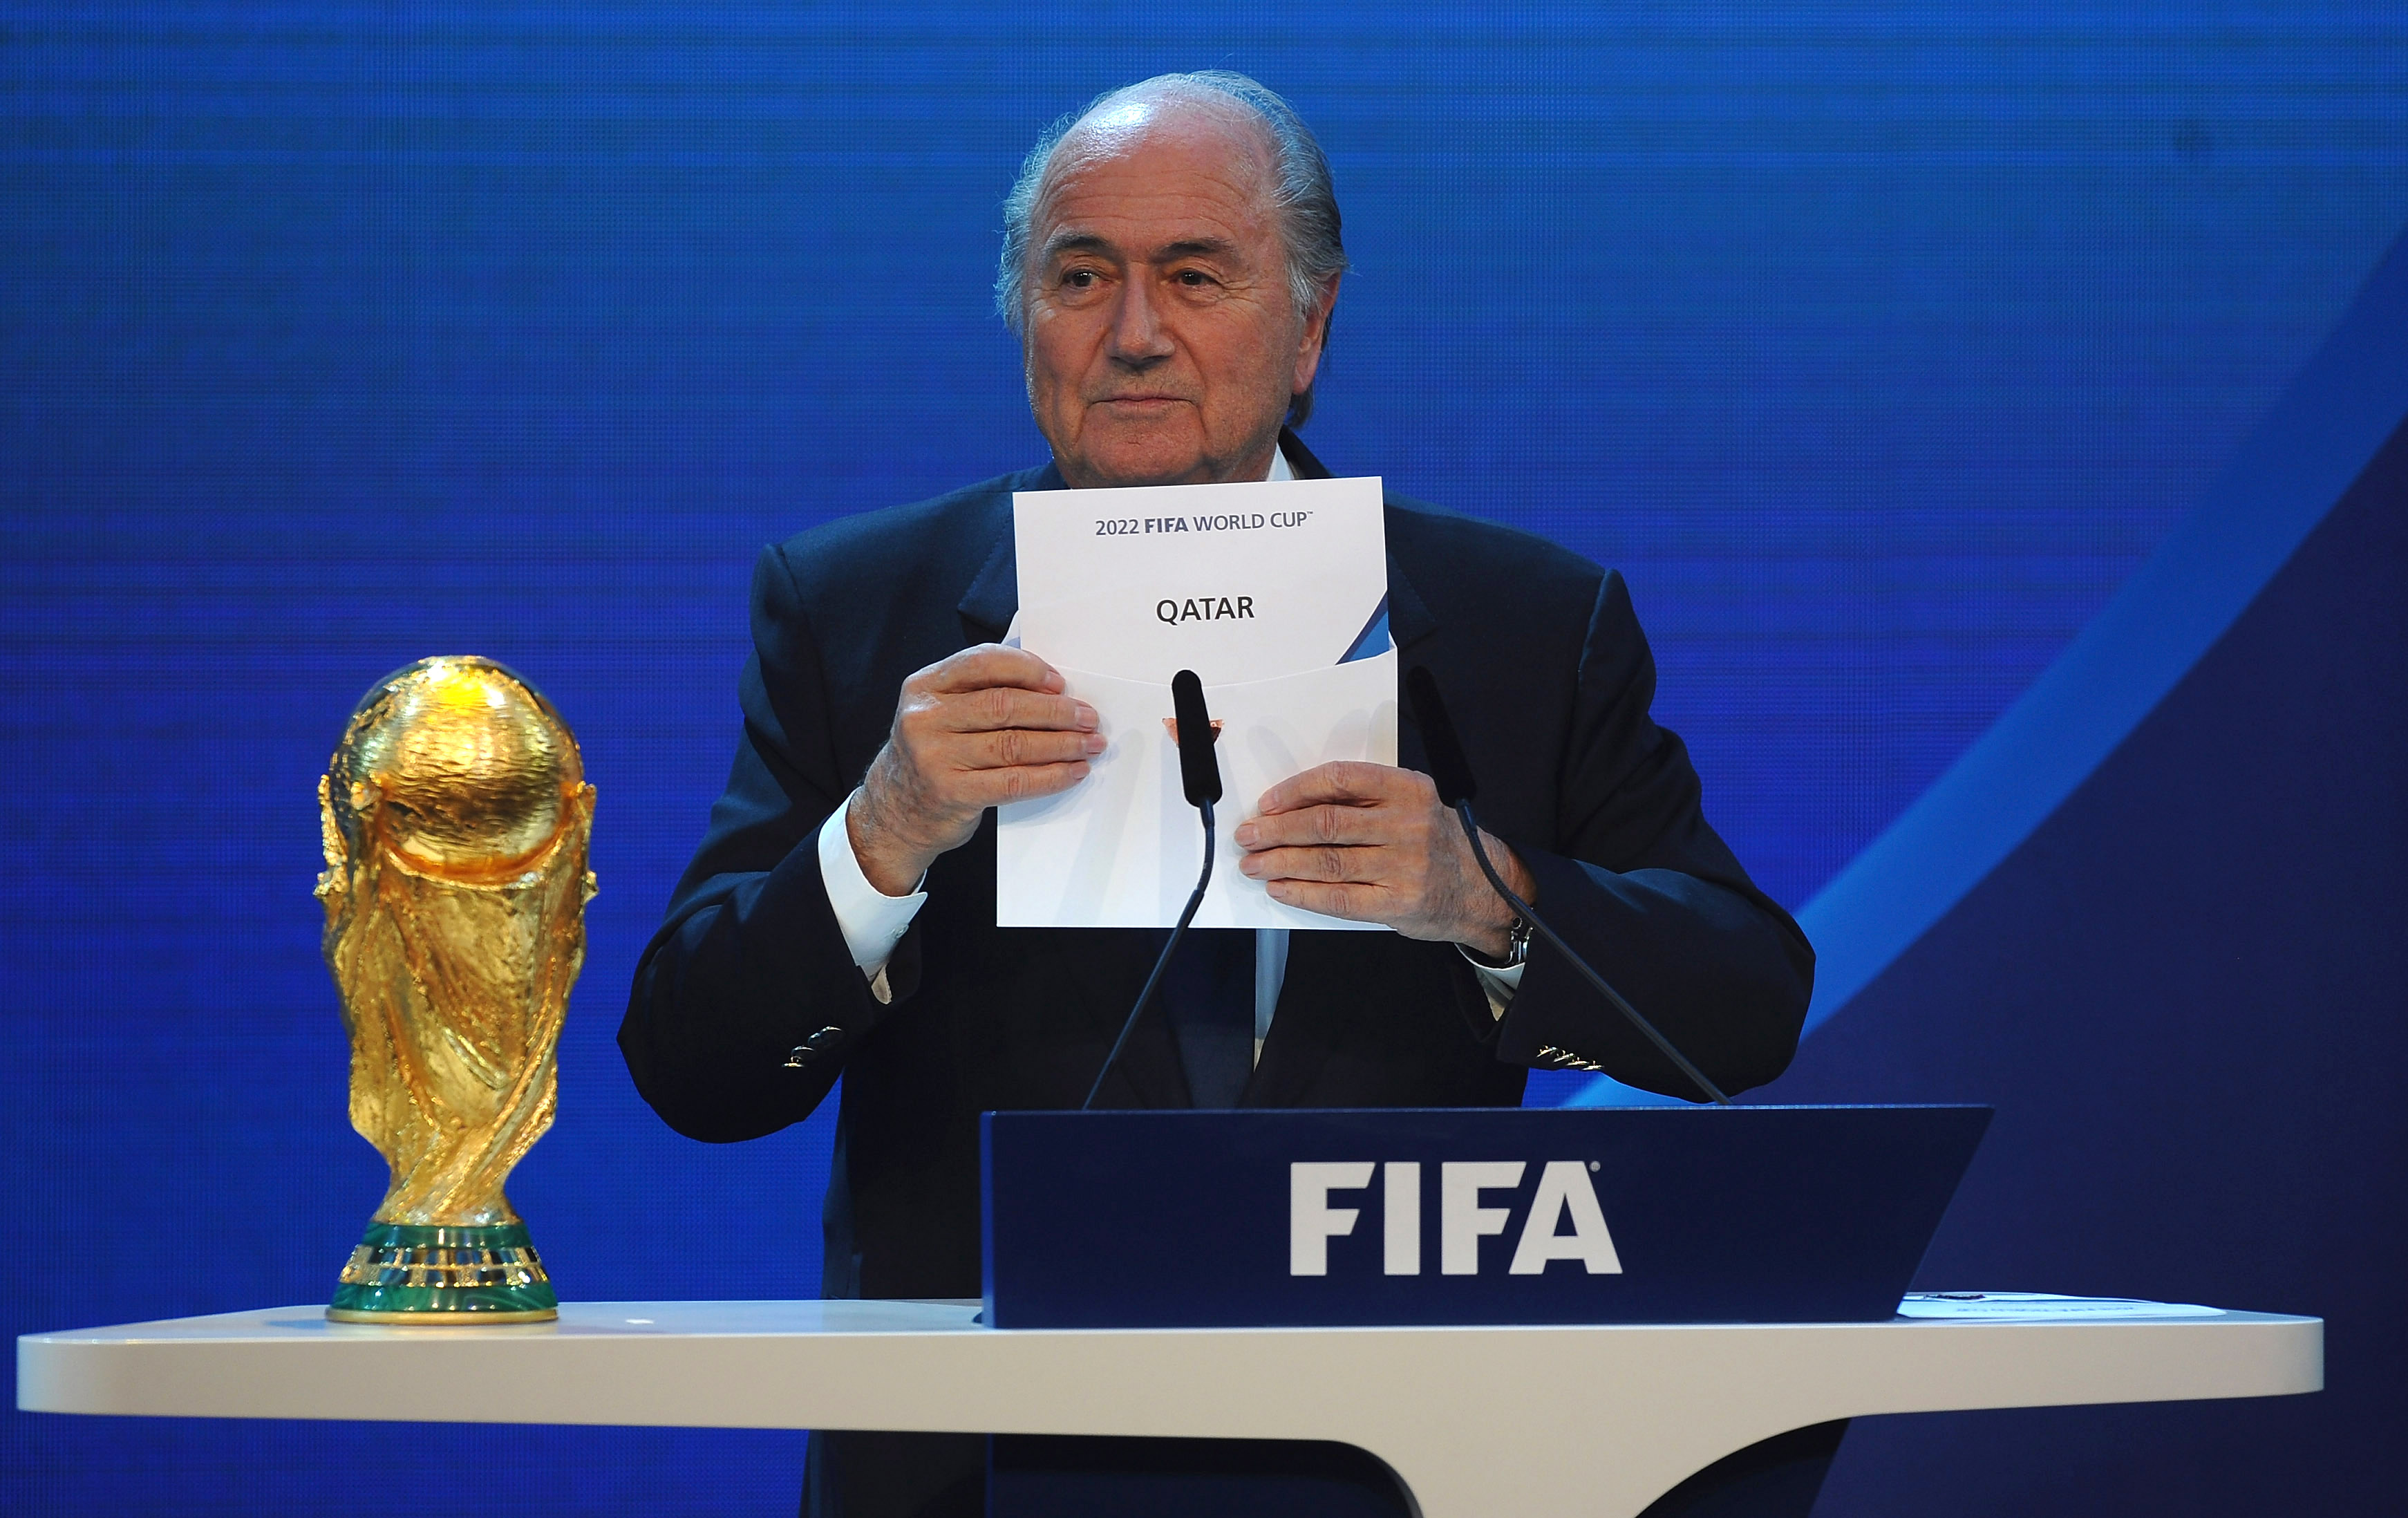 ZURICH, SWITZERLAND - DECEMBER 02: FIFA President Joseph S Blatter names Qatar as the winning hosts of 2022 duirng the FIFA World Cup 2018 & 2022 Host Countries Announcement at the Messe Conference Centre on December 2, 2010 in Zurich, Switzerland.  (Phot